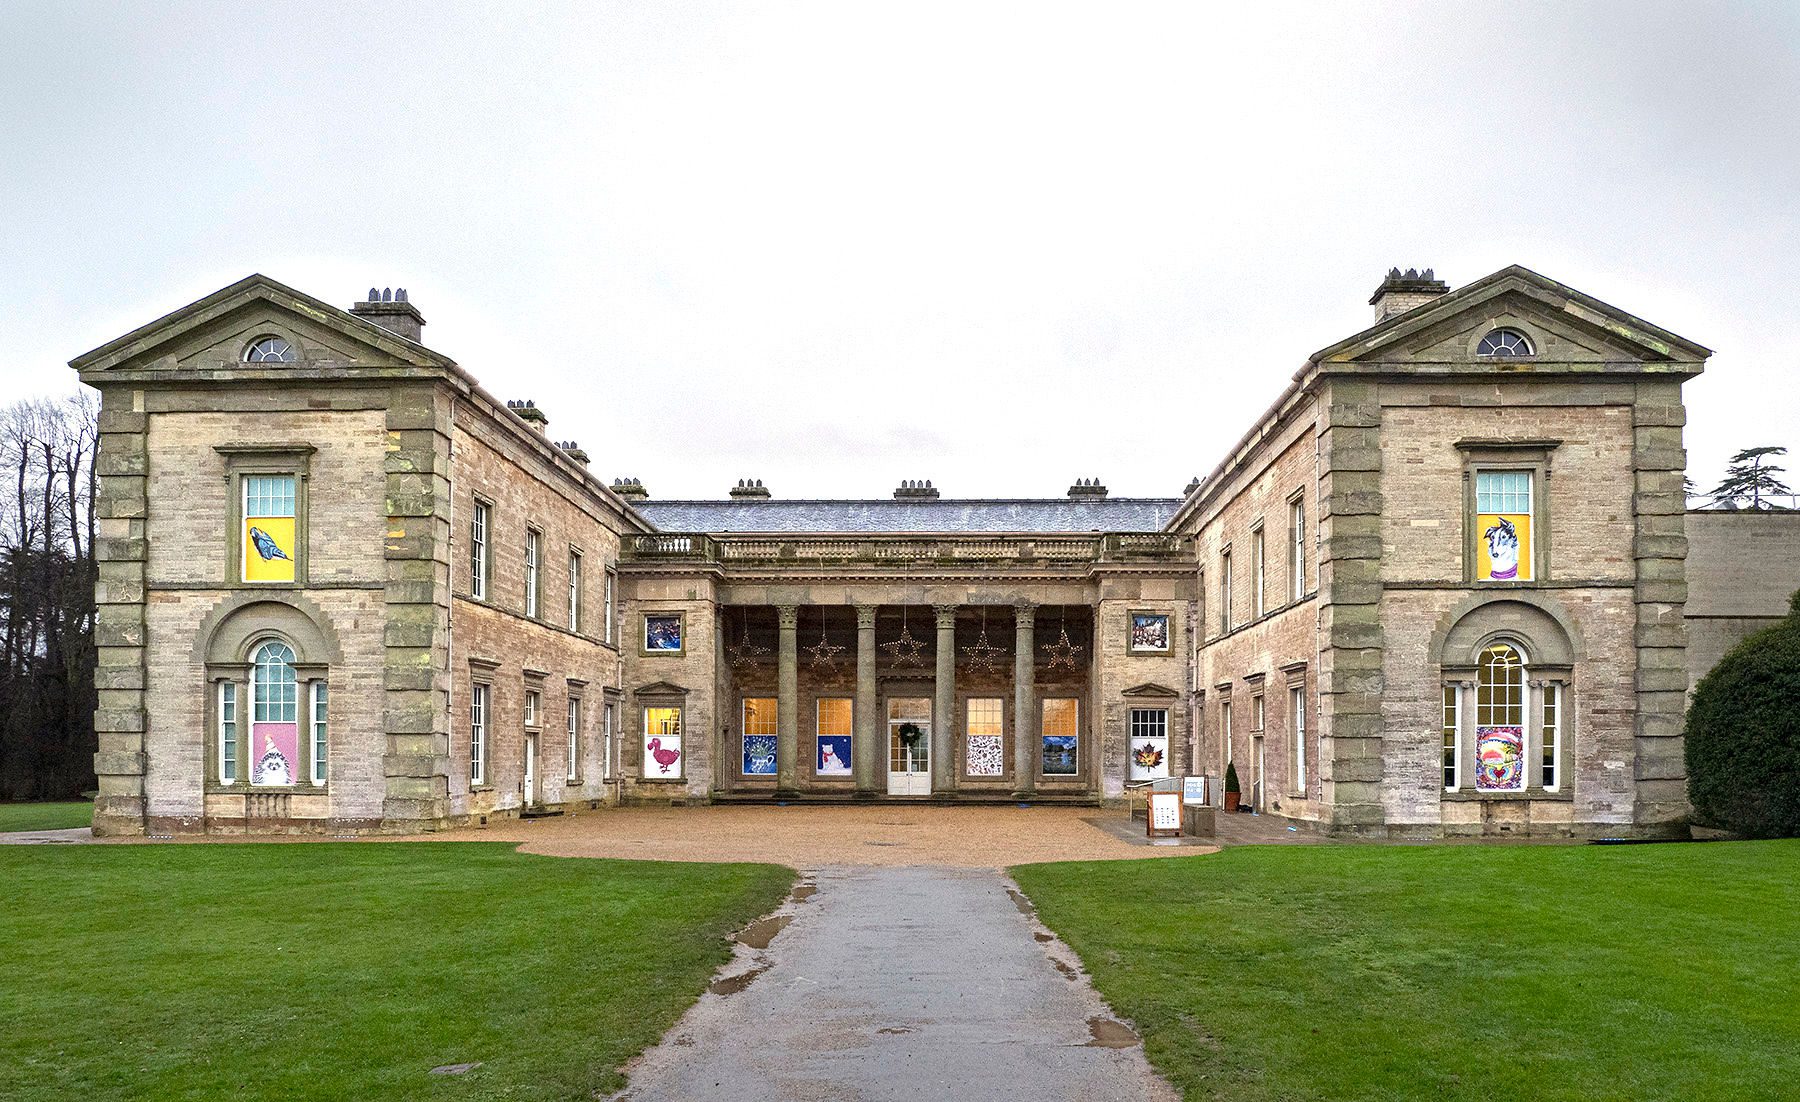 The 12 Days of Christmas at Compton Verney